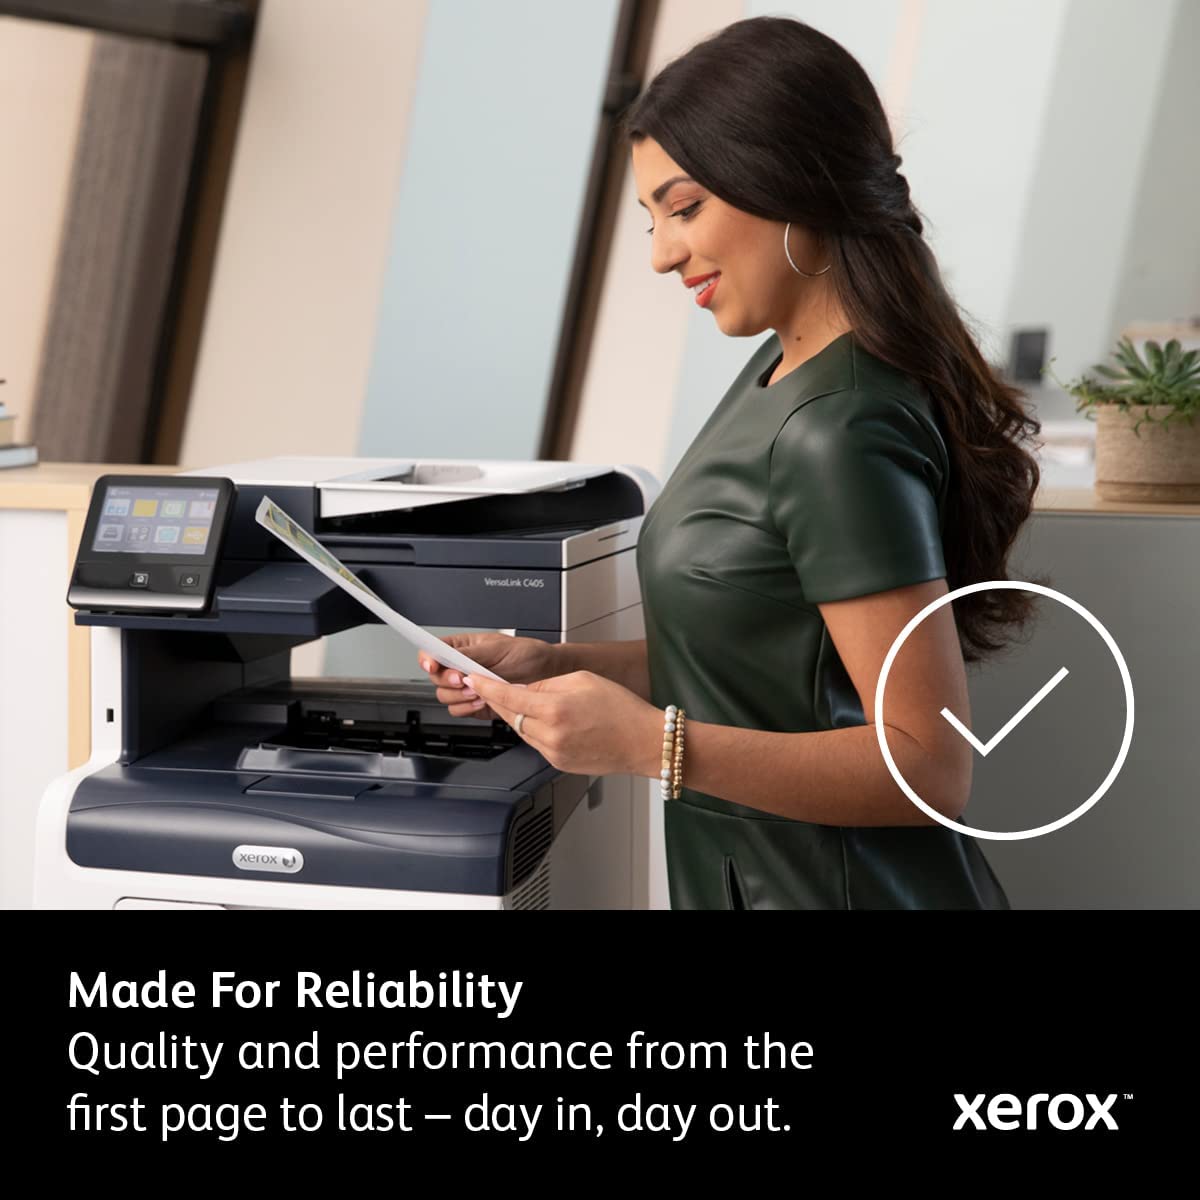 Xerox Phaser 6510/ Workcentre 6515 Black High Capacity Toner-Cartridge (5500 Pages) - 106R03480 High Capacity Black